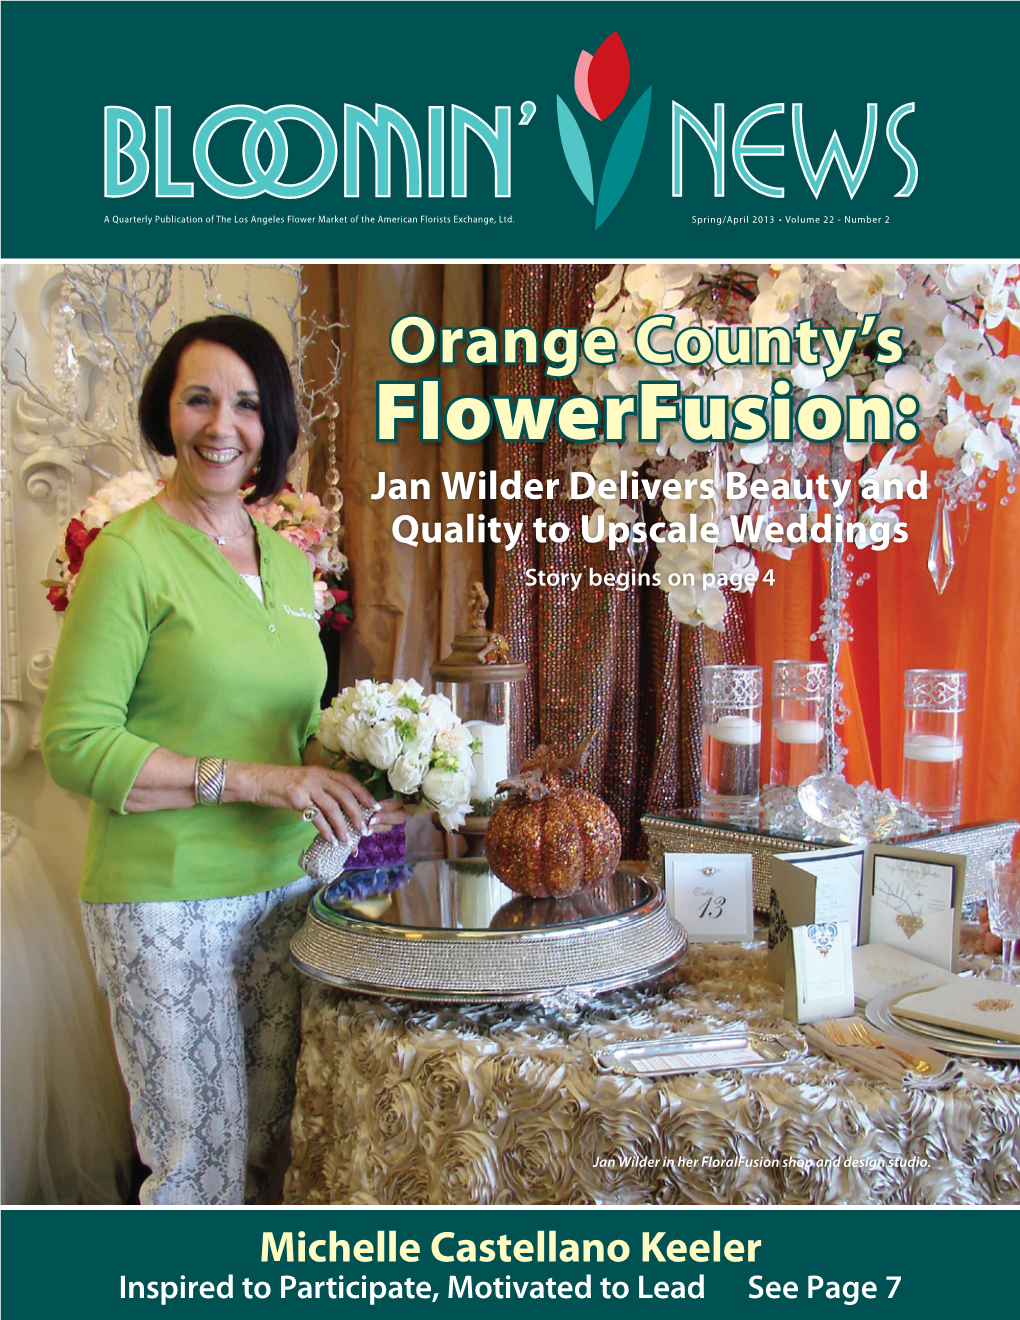 Flowerfusion: Jan Wilder Delivers Beauty and Quality to Upscale Weddings Story Begins on Page 4